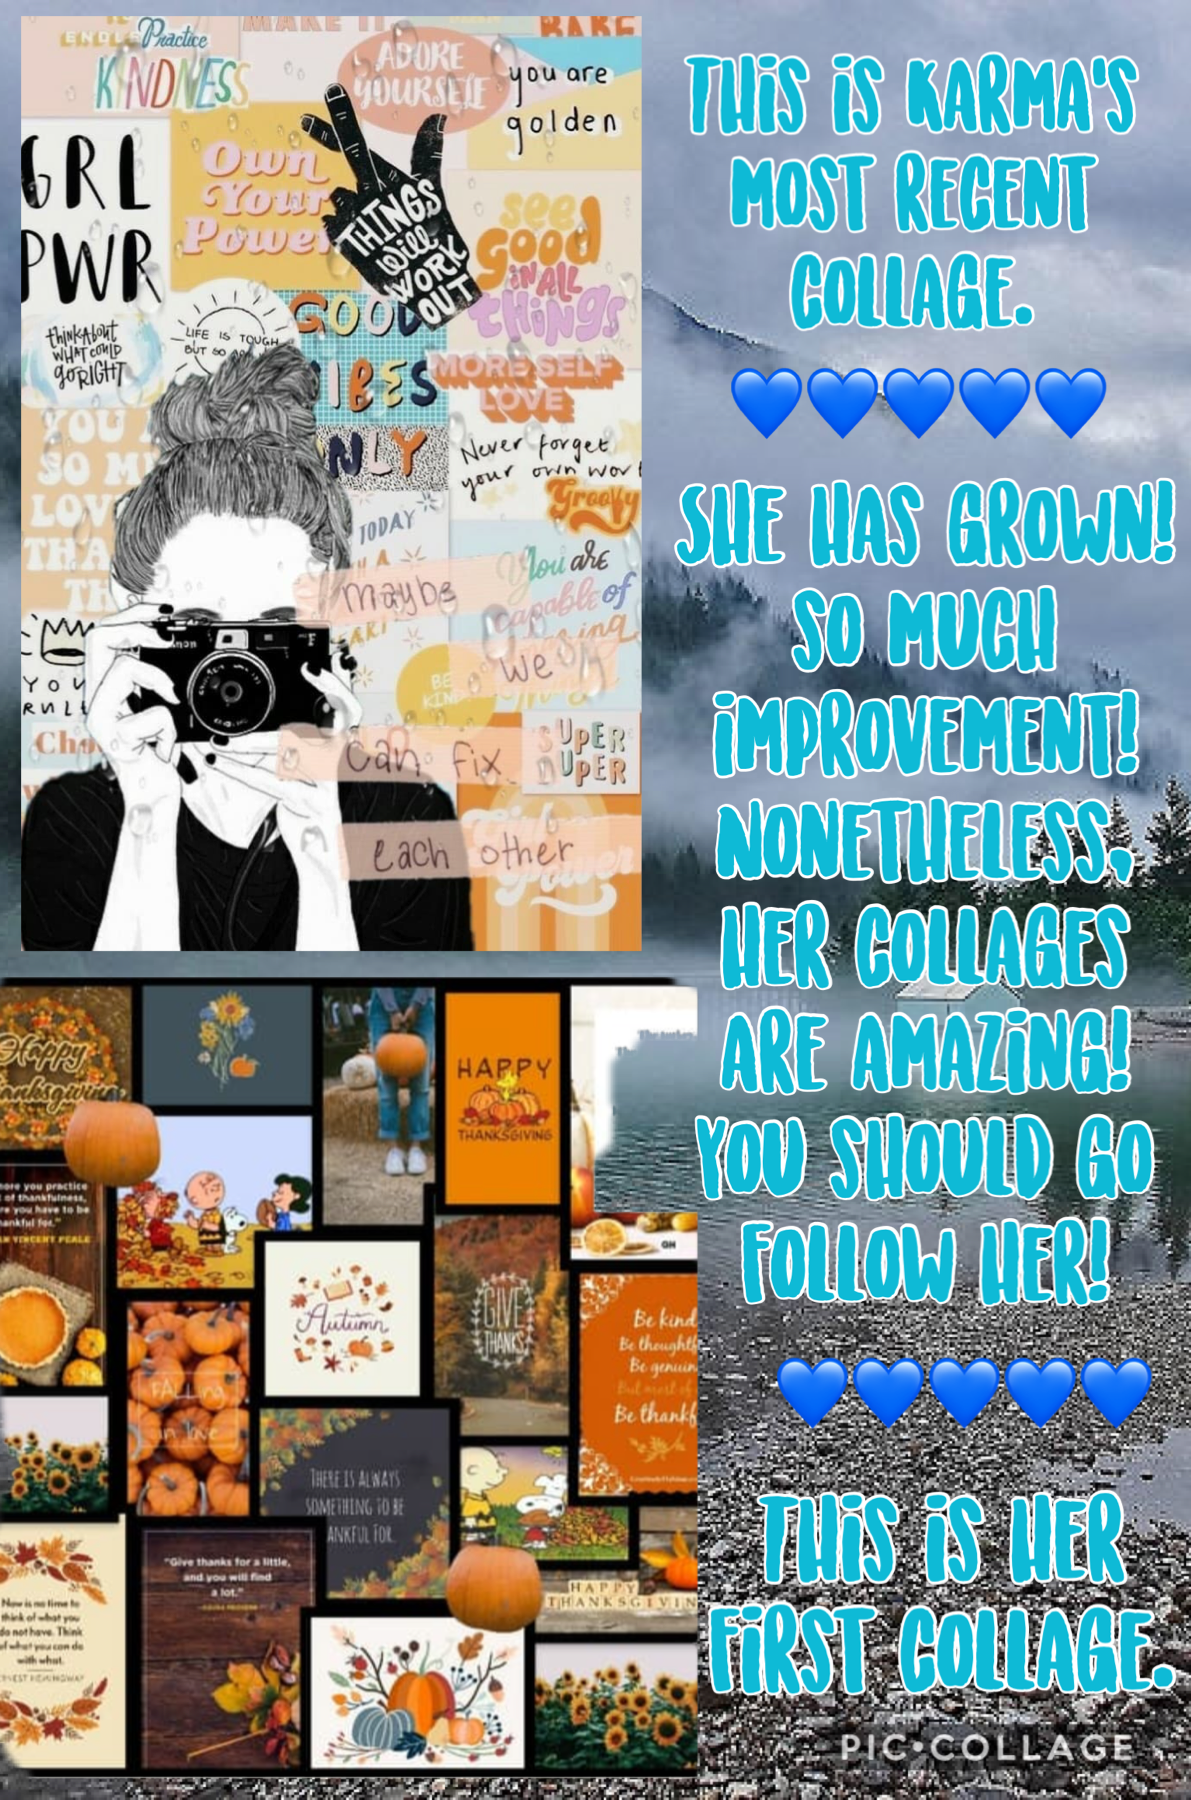 Karma-Lee has had so much improvement! She is so amazing, like all my and her followers and her friends! 💙💙💙💙💙💙Karma-Lee💙💙💙💙💙💙